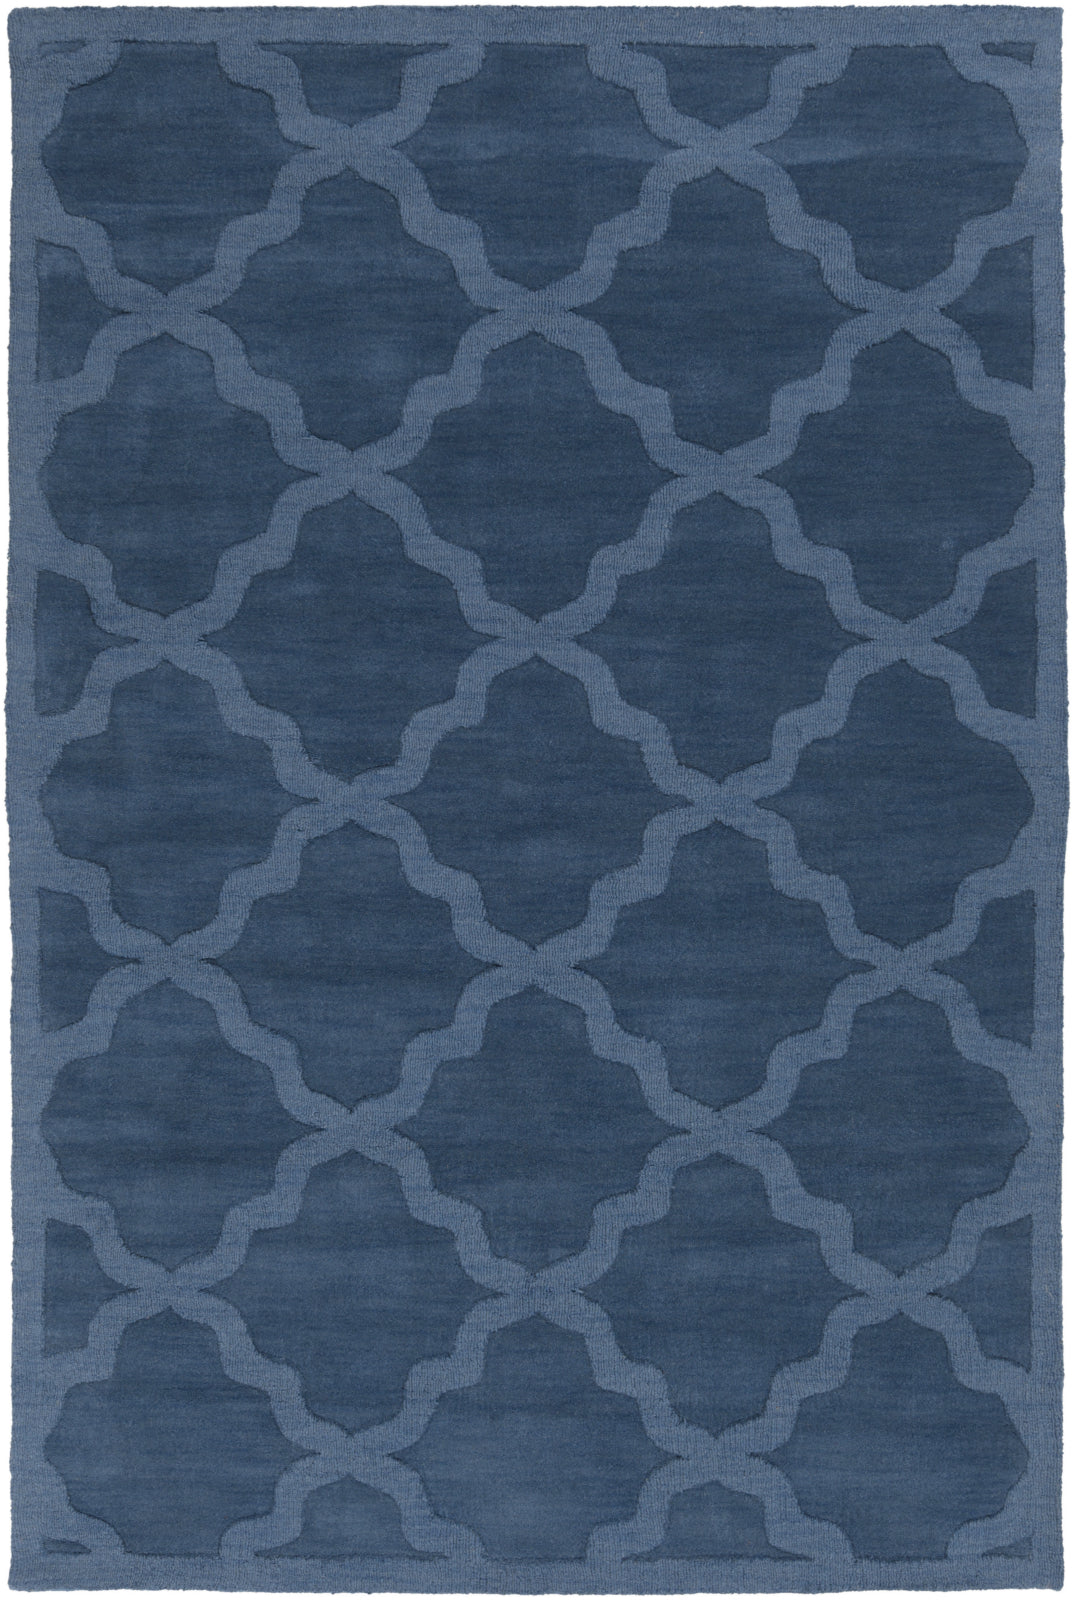 Artistic Weavers Central Park Abbey AWHP4018 Area Rug main image